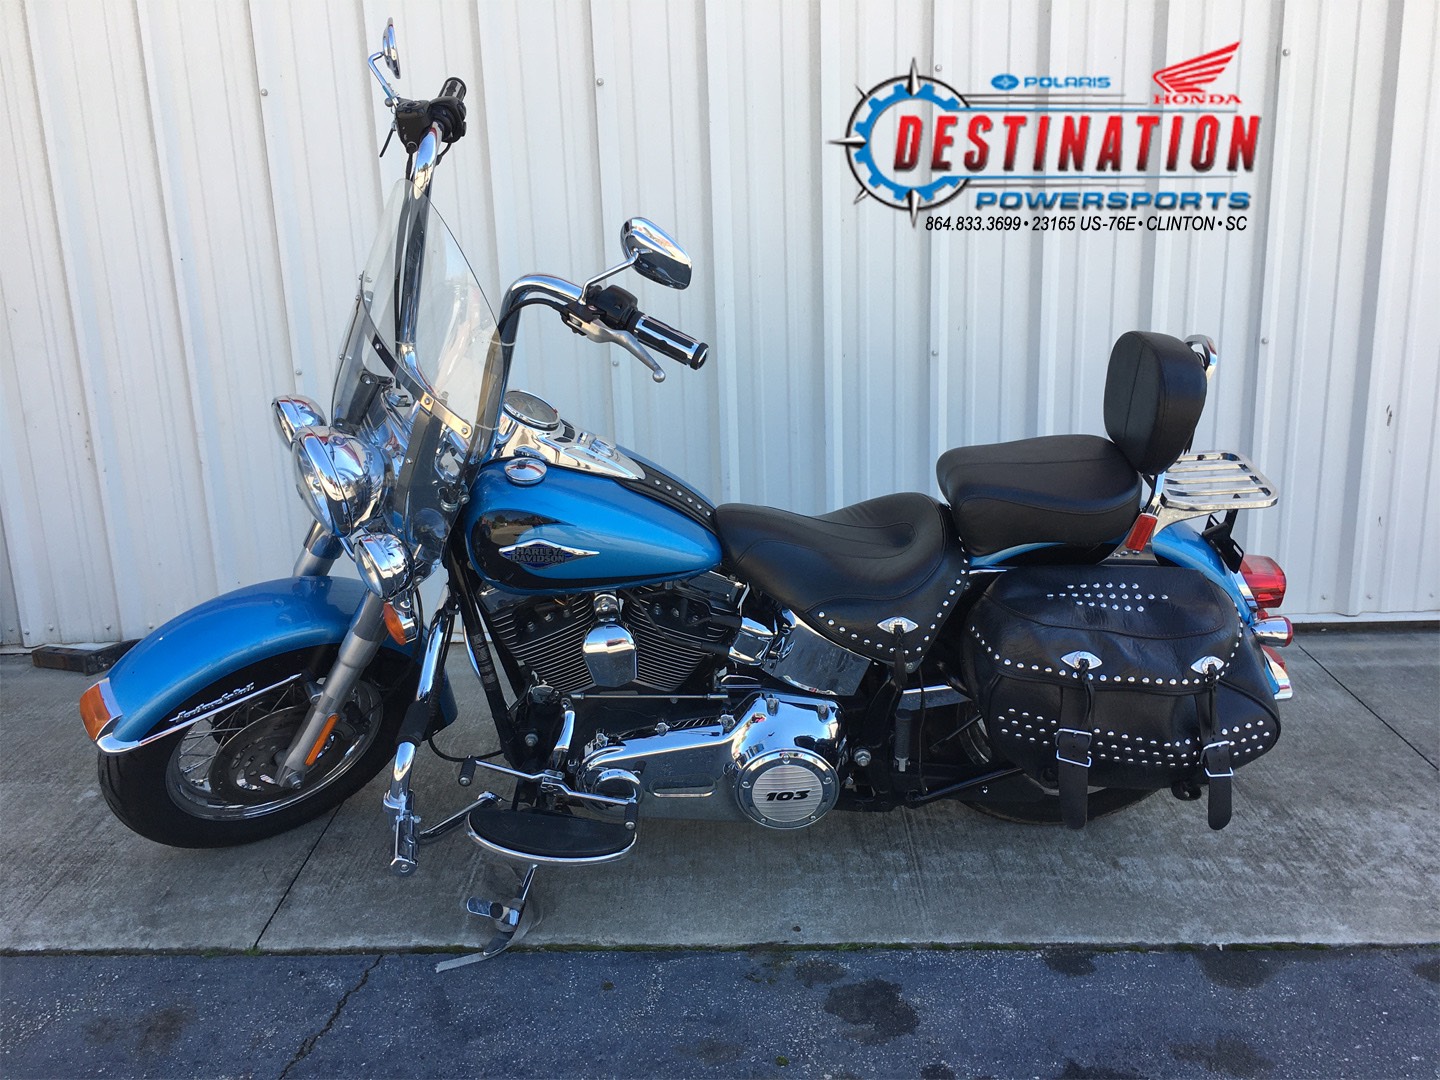 Used 2011 Harley Davidson Heritage Softail Classic Motorcycles In Clinton Sc Bb011141 Cool Blue Pearl Vivid Black